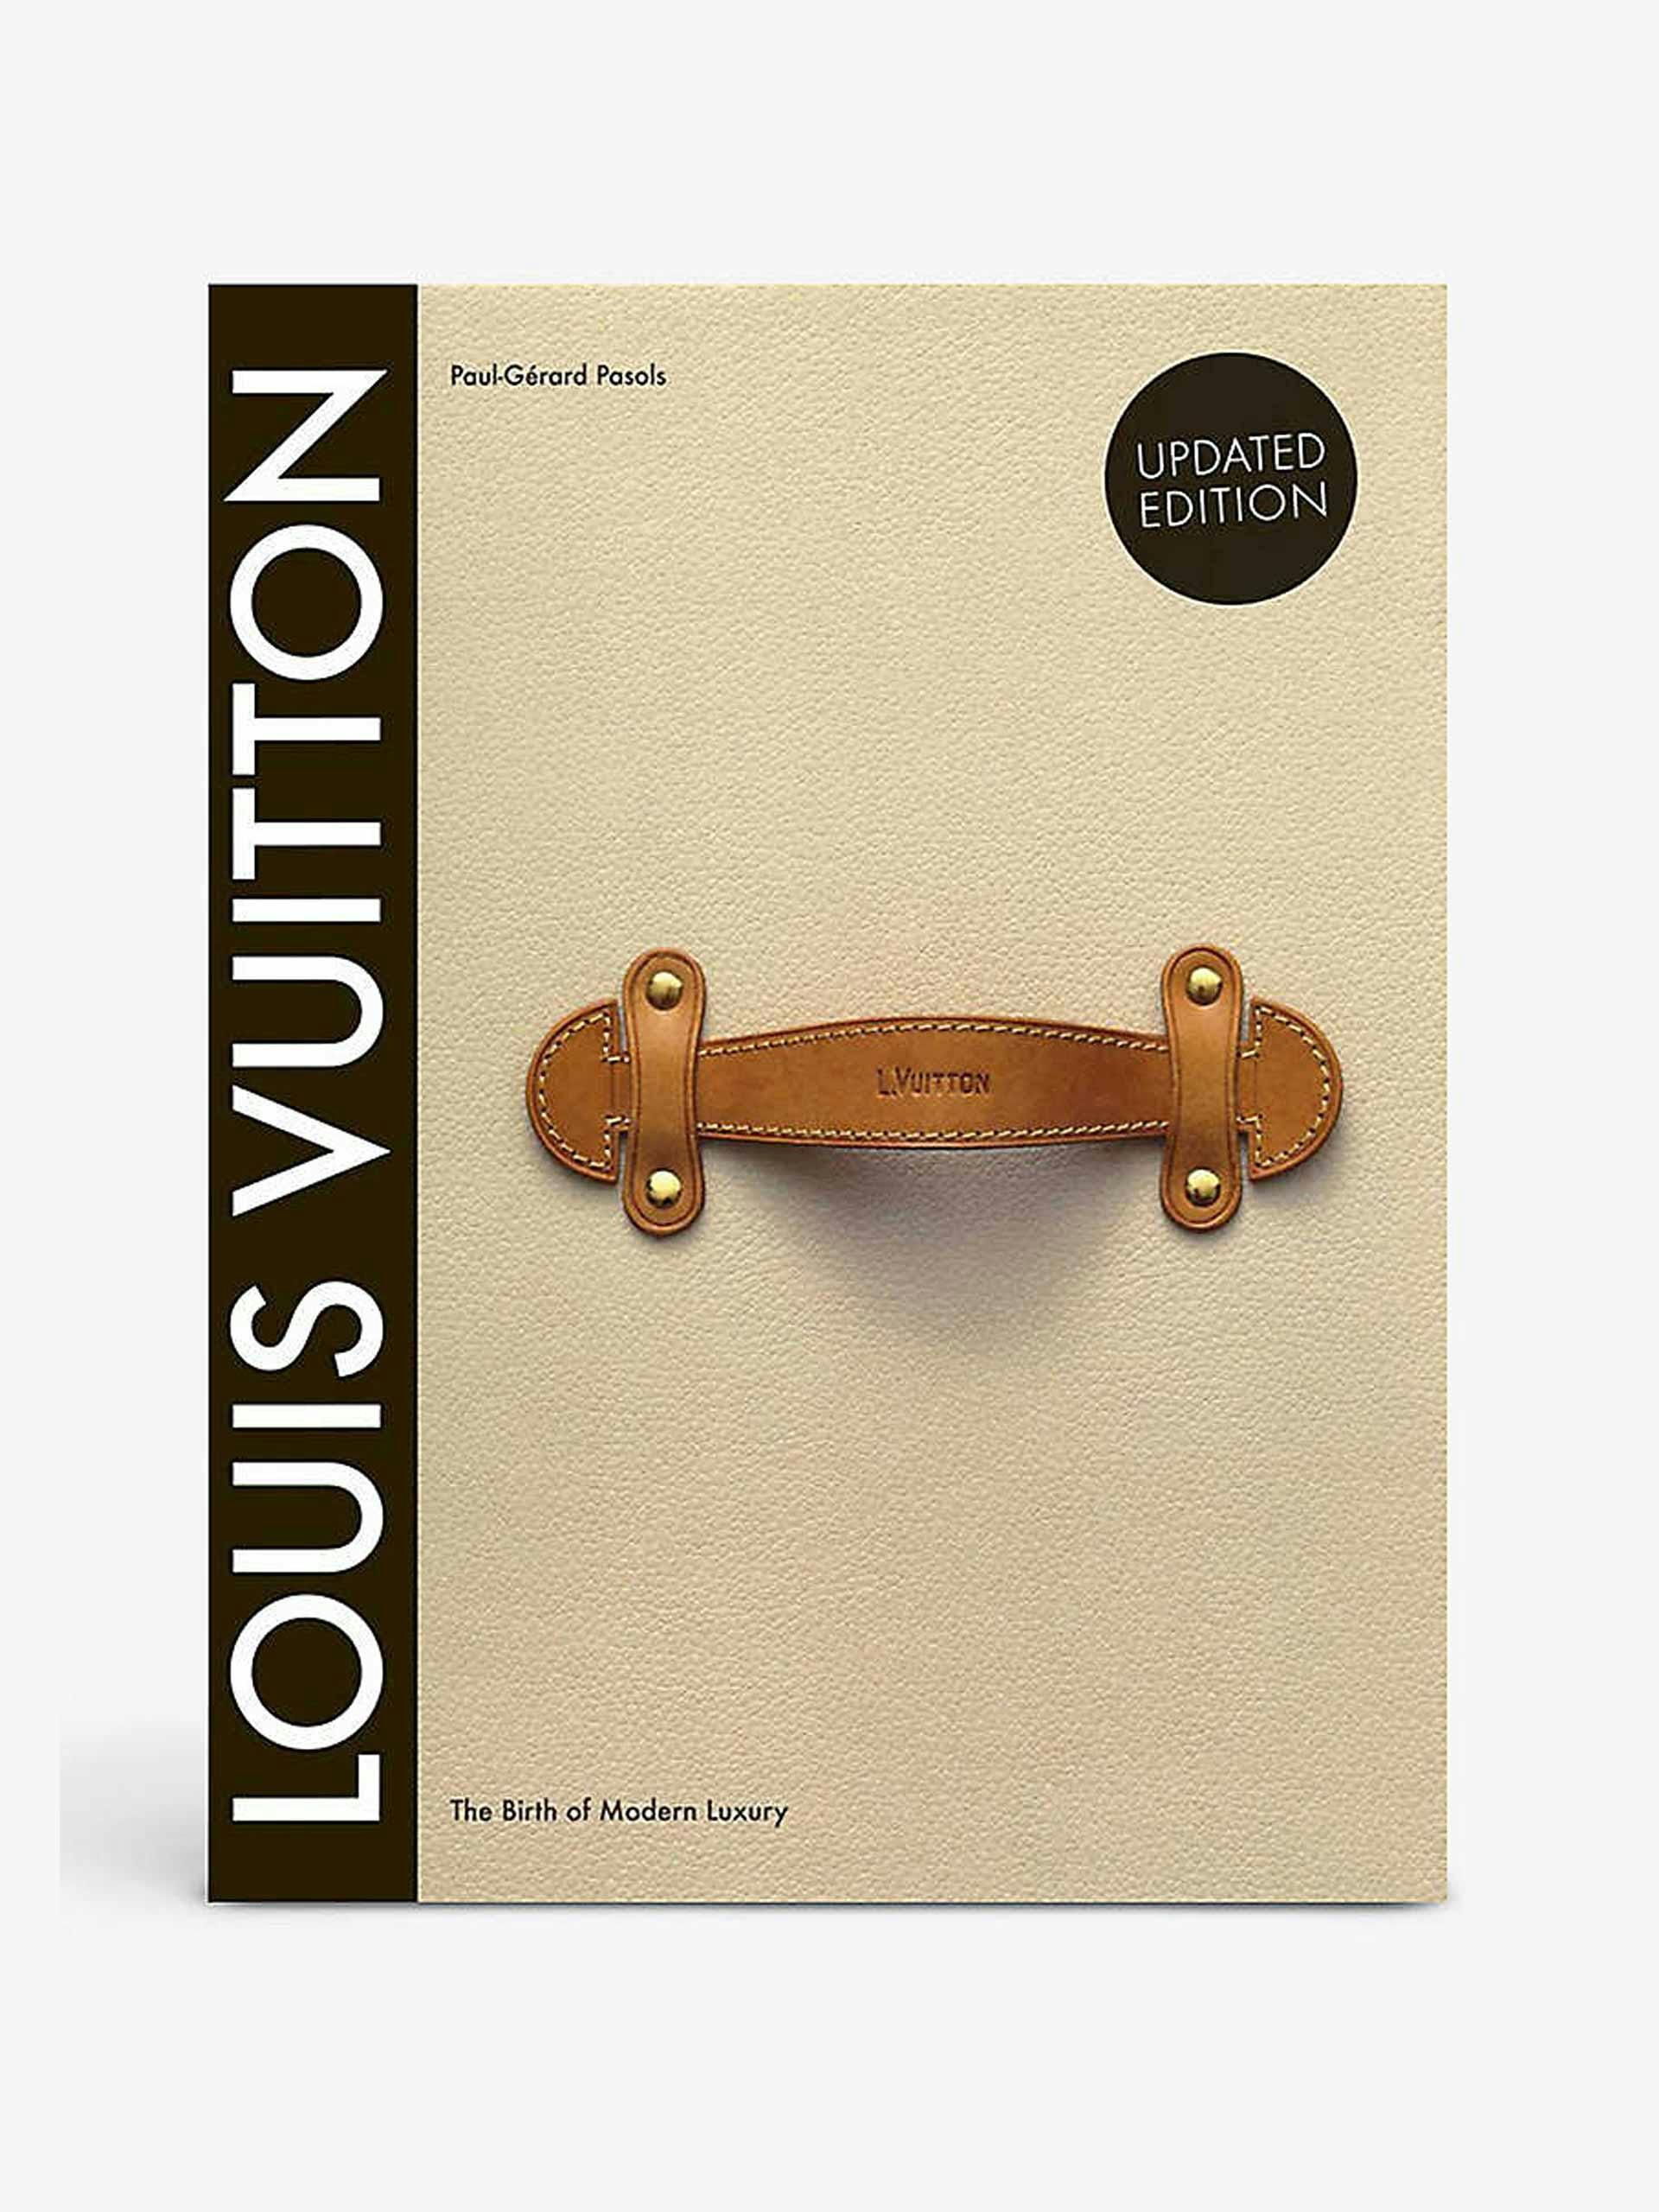 'Louis Vuitton: The Birth Of Modern Luxury' hardcover book